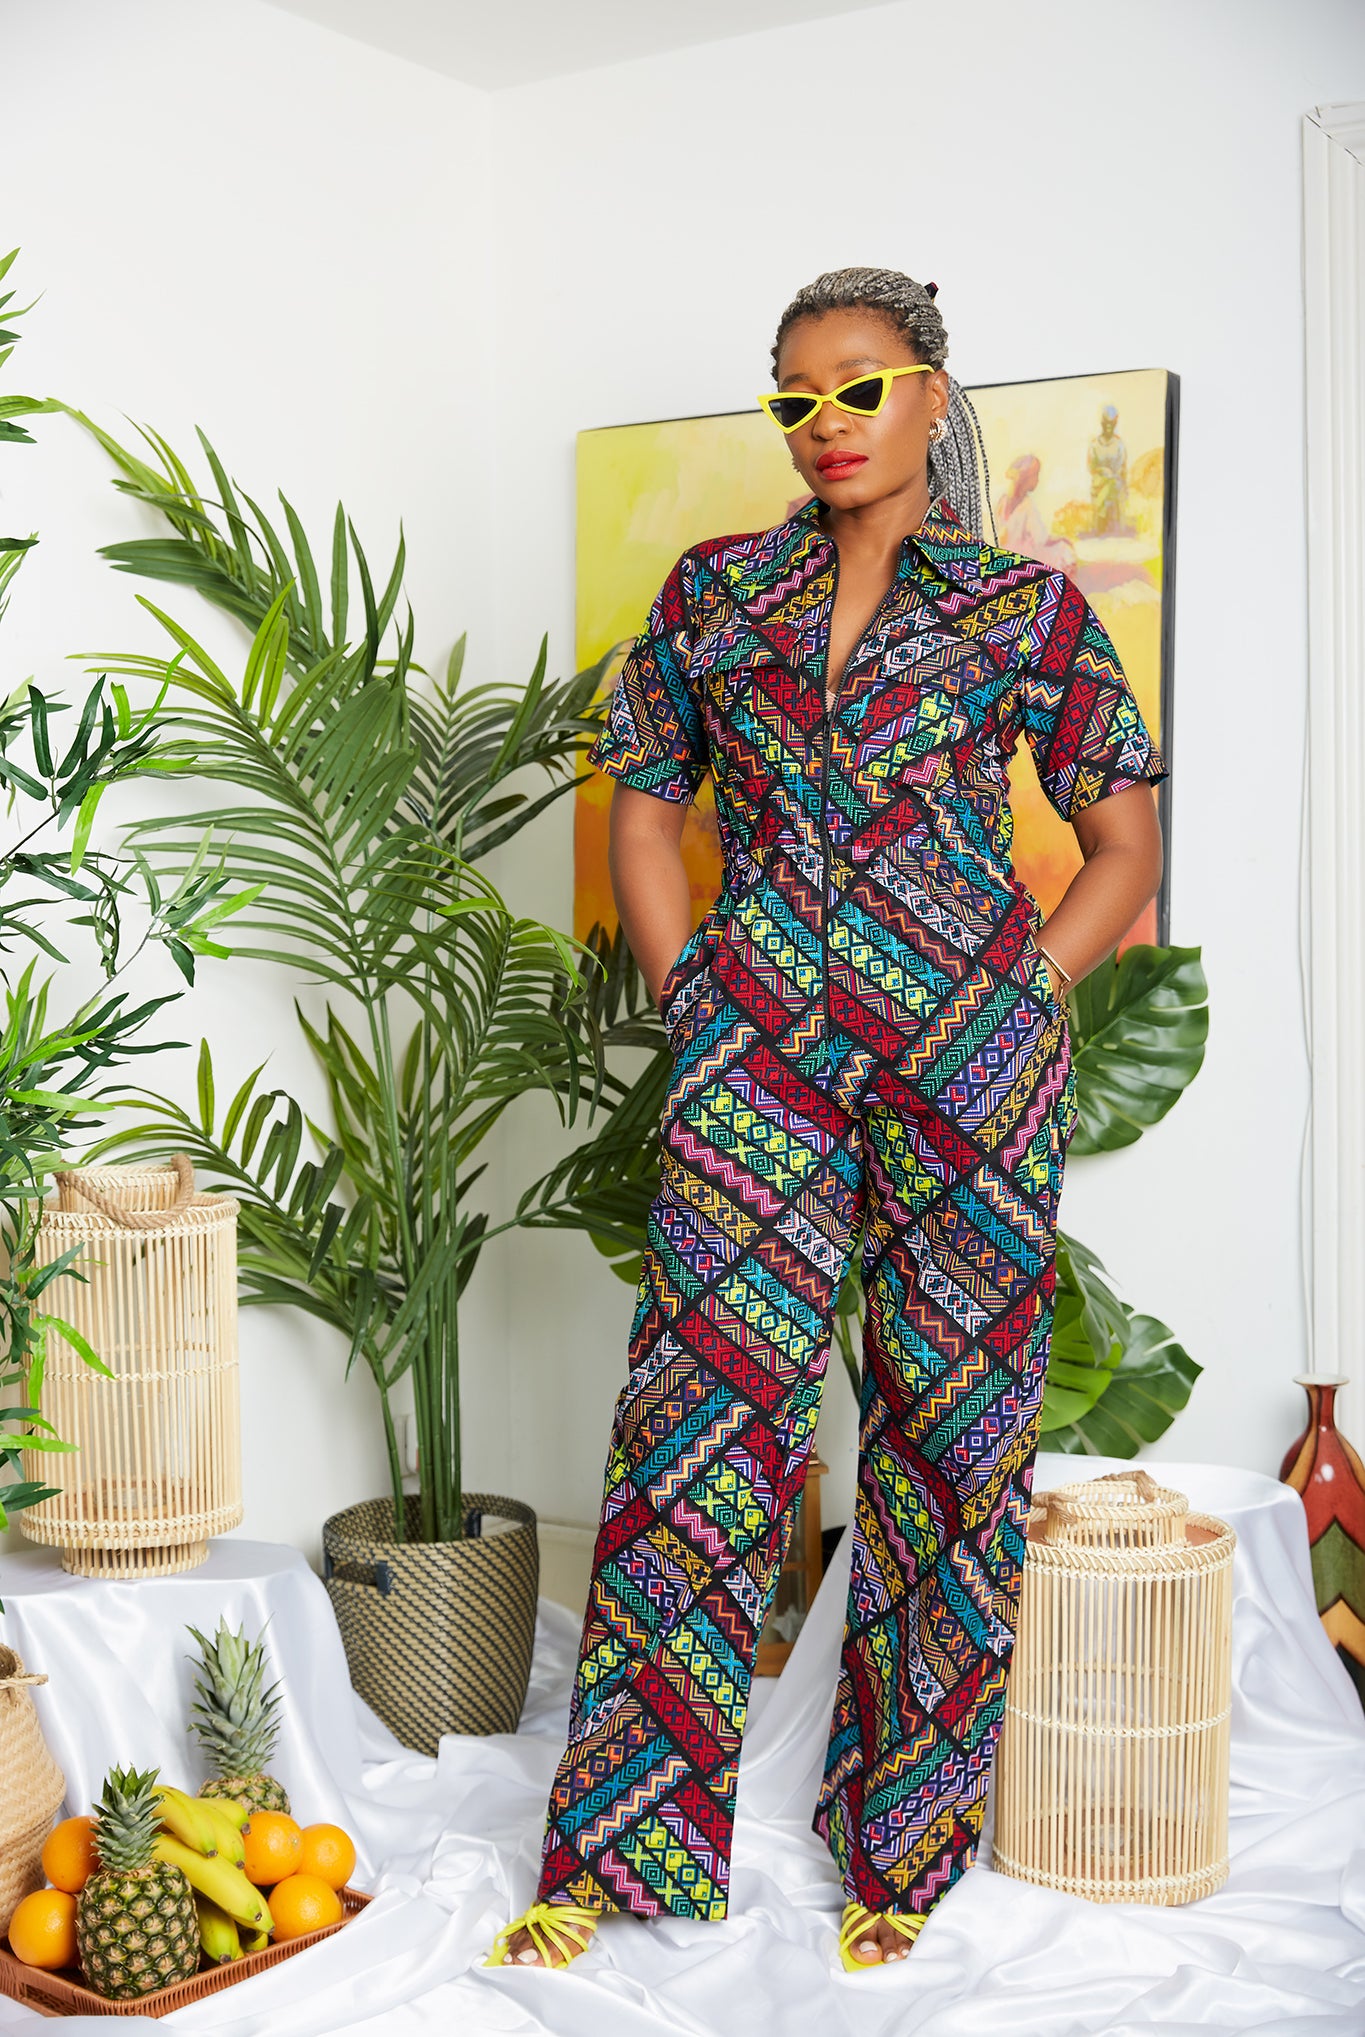 African Print Romper suit | African print Playsuit | African print Onesies | African Print Outerwear | Fall Fashion for African women | sustainable African Fashion | recycled African print clothing | Ethically sourced fashion | ethically sourced clothing | handmade clothing | African clothing for women | Ankara jacket | Tribal prints kimono | Floral African print clothing | Cotton Blazer | African print workwear | African clothing UK | Black-owned fashion brand | UK Based African Fashion Brand